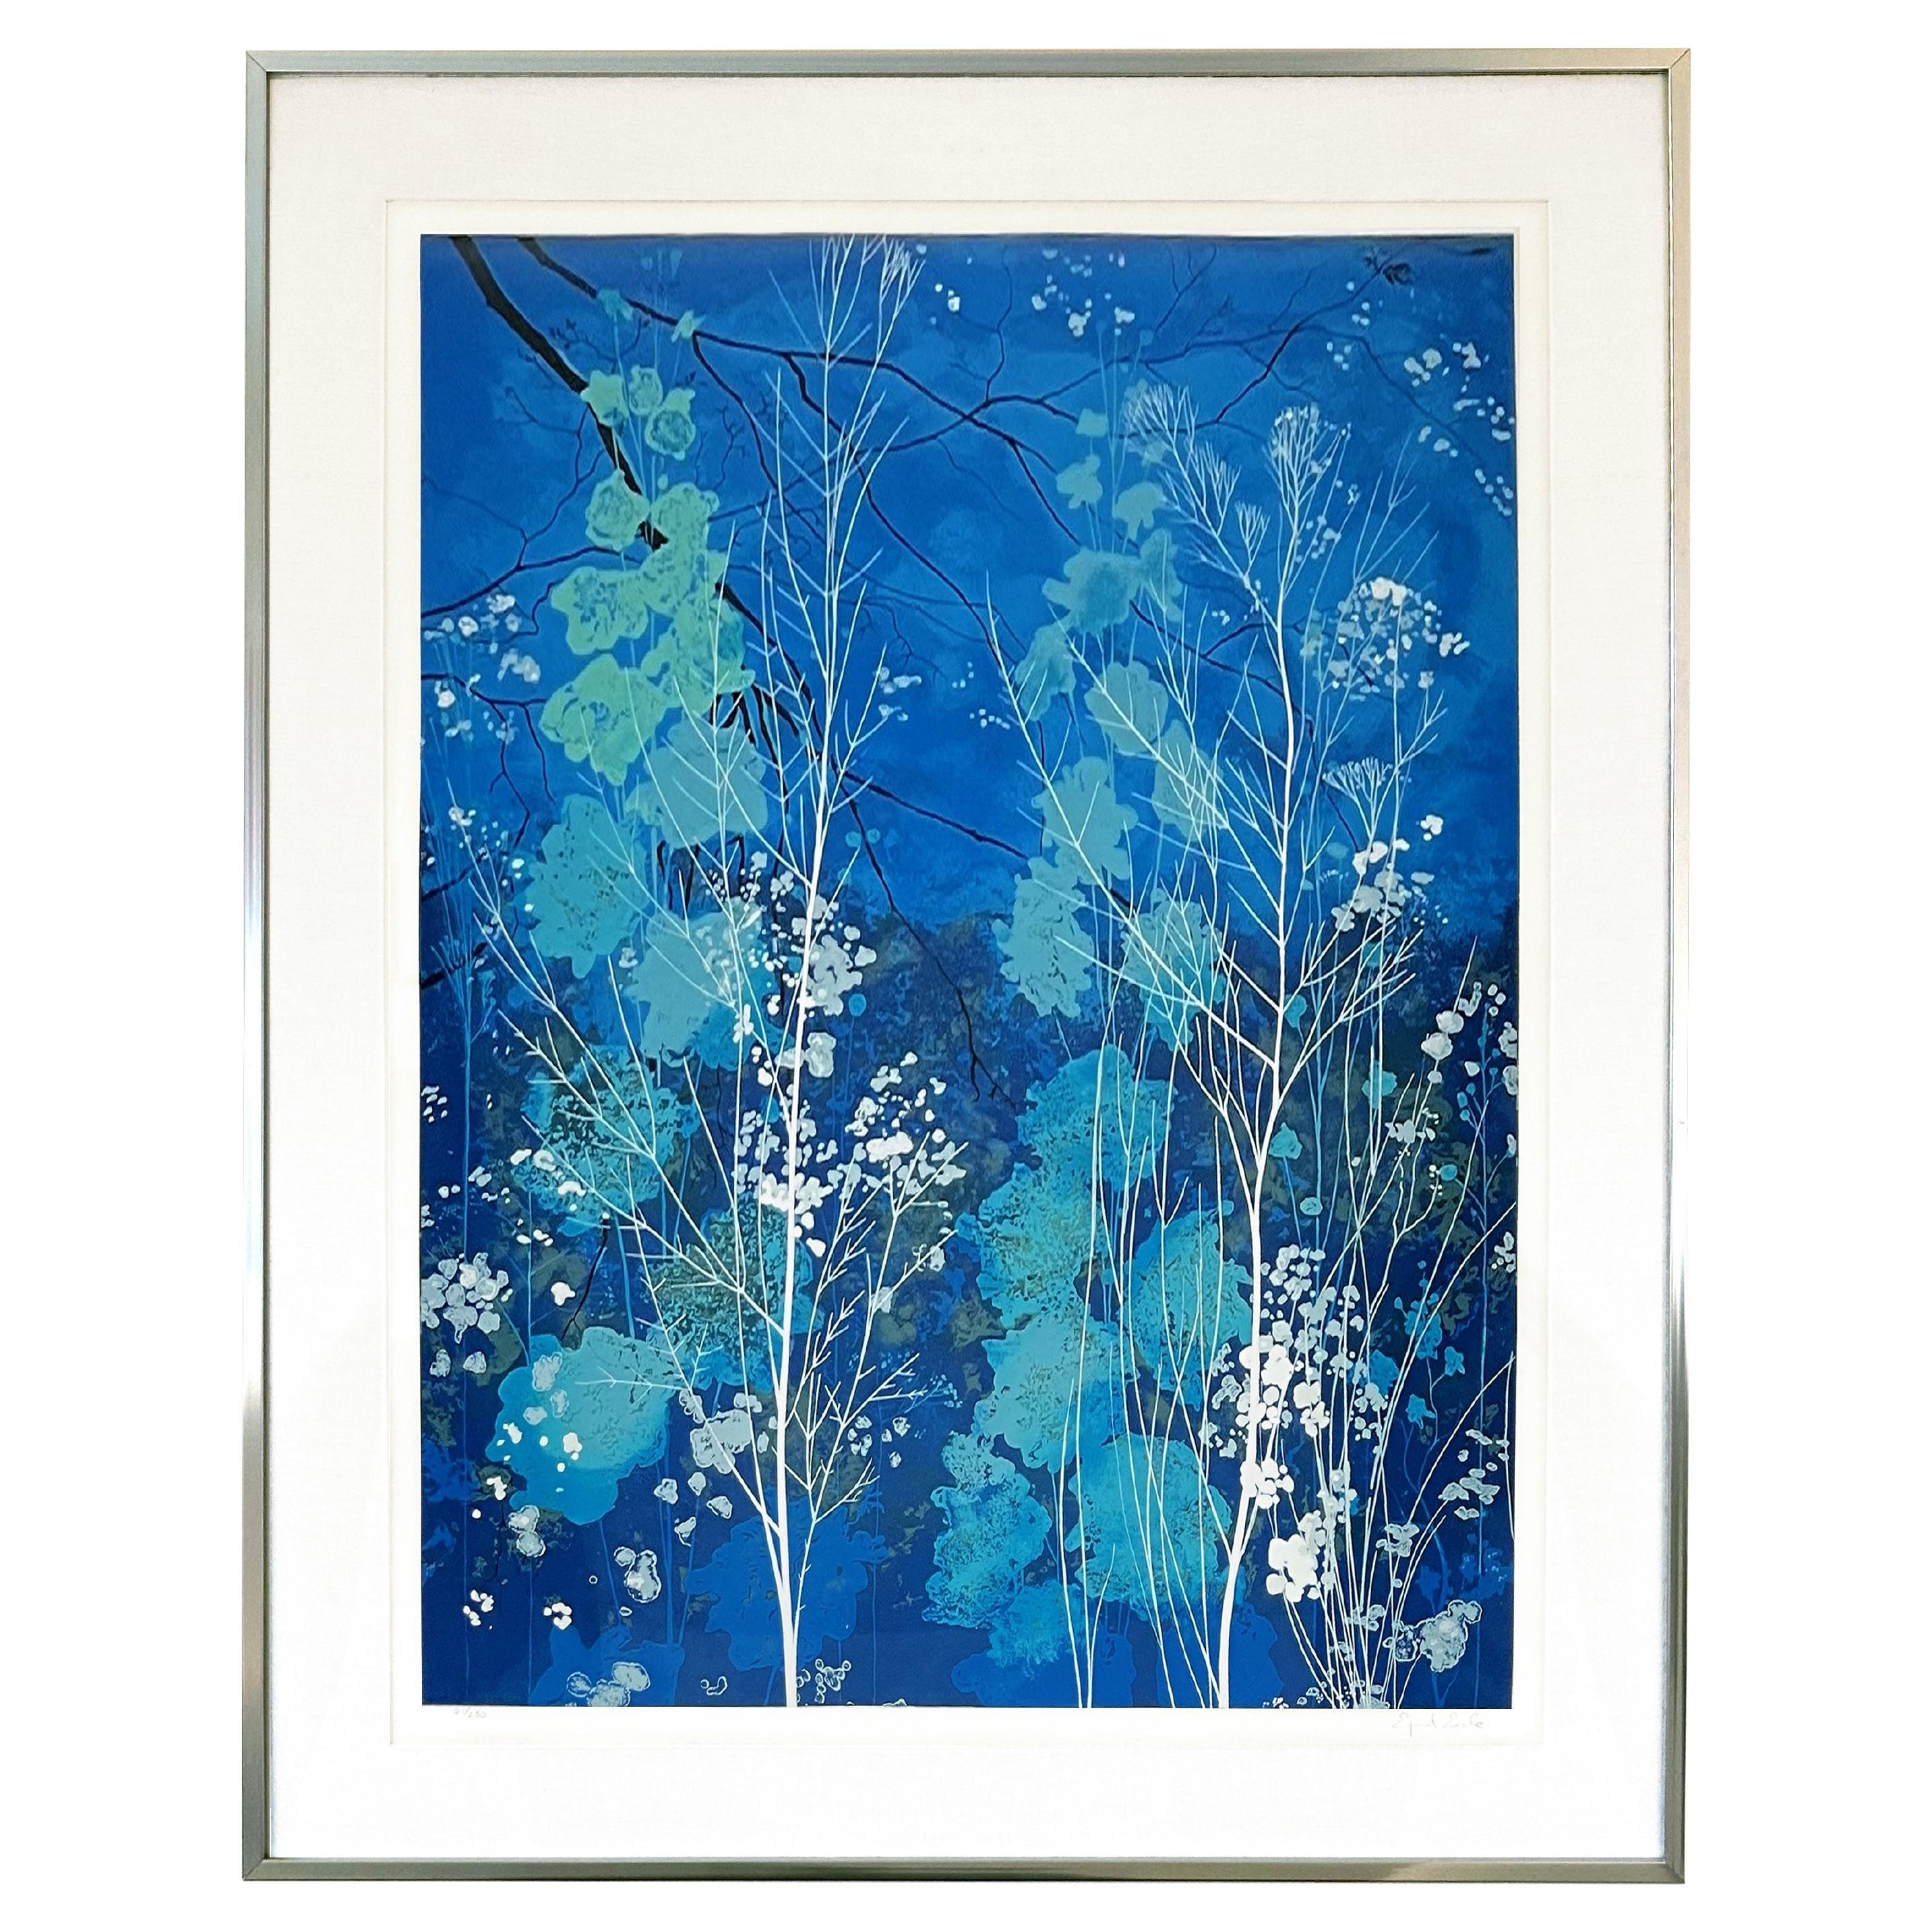 "Delphinium" by Eyvind Earle Serigraph on Paper, Signed and Numbered, Framed